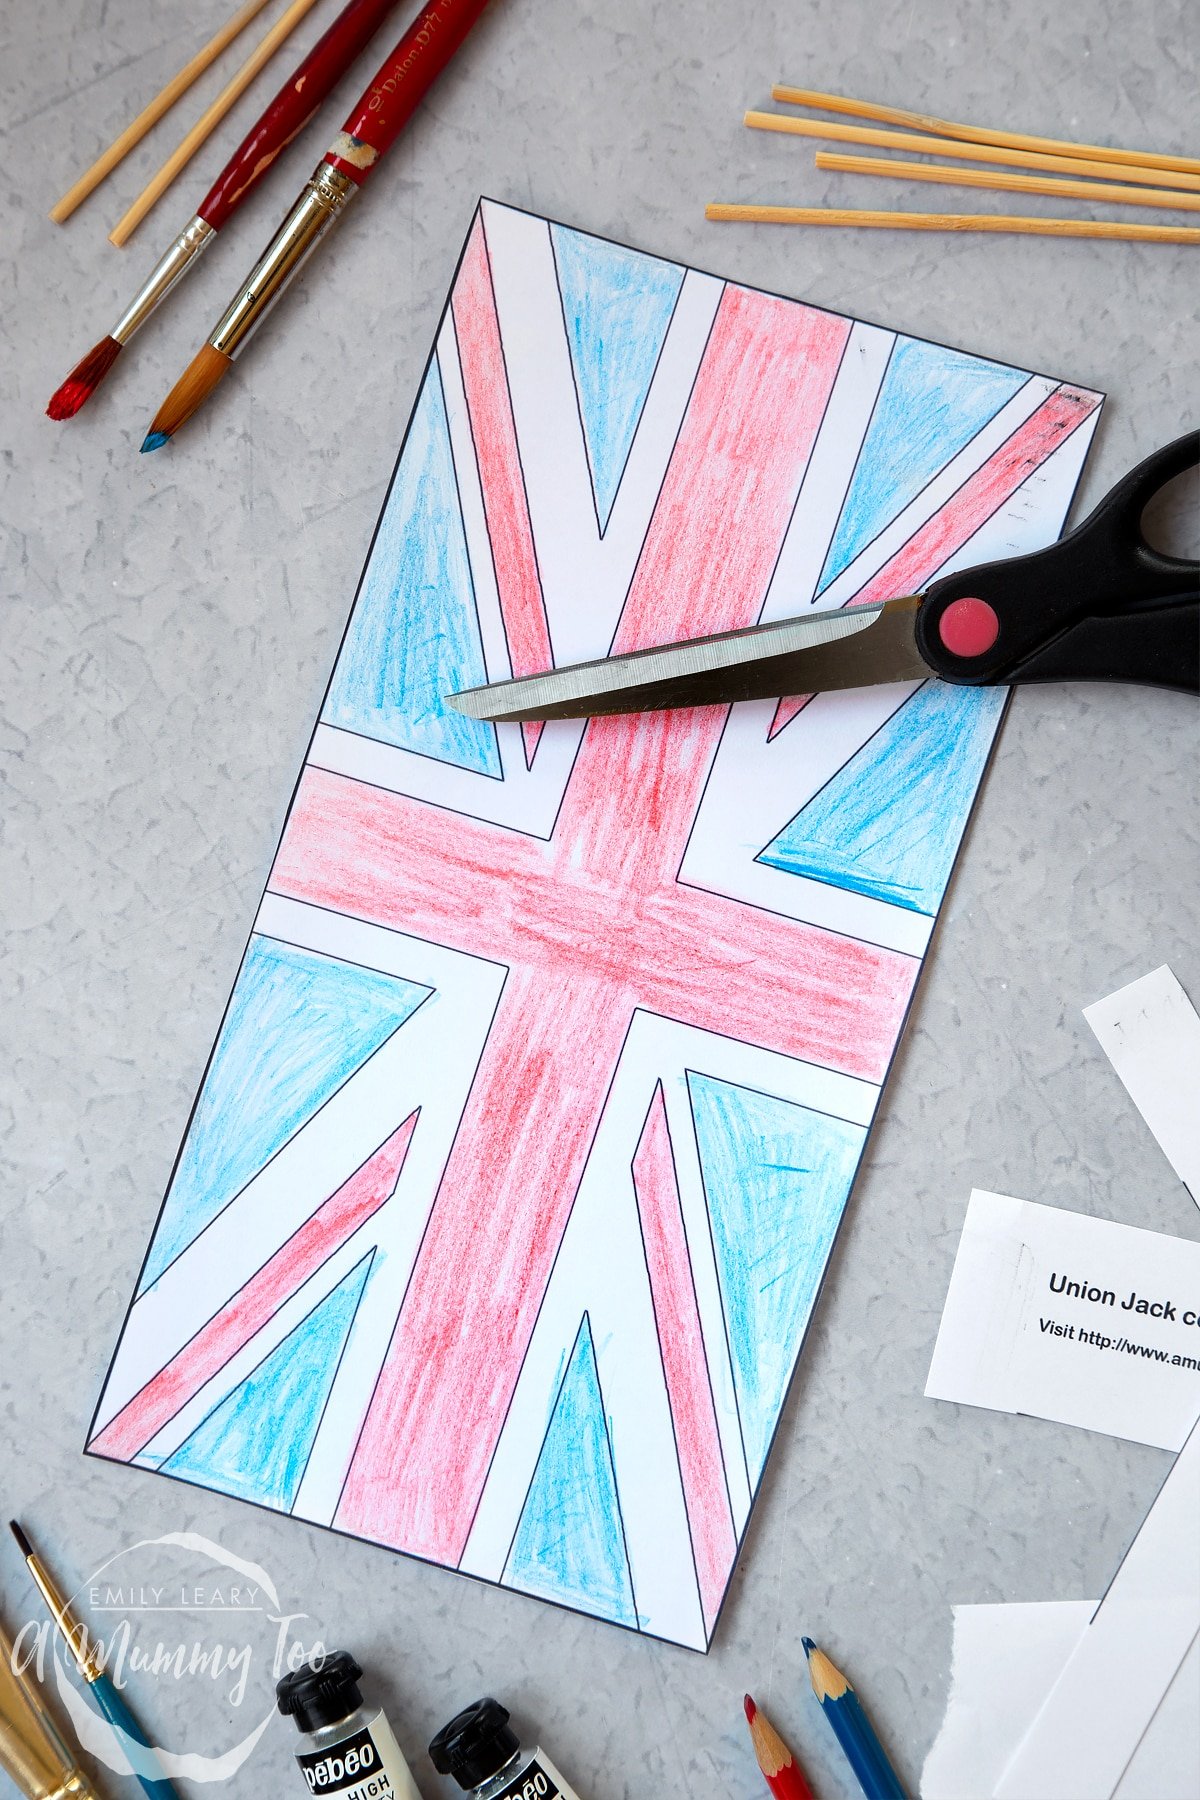 printed and coloured union jack flag and cut out to shape.